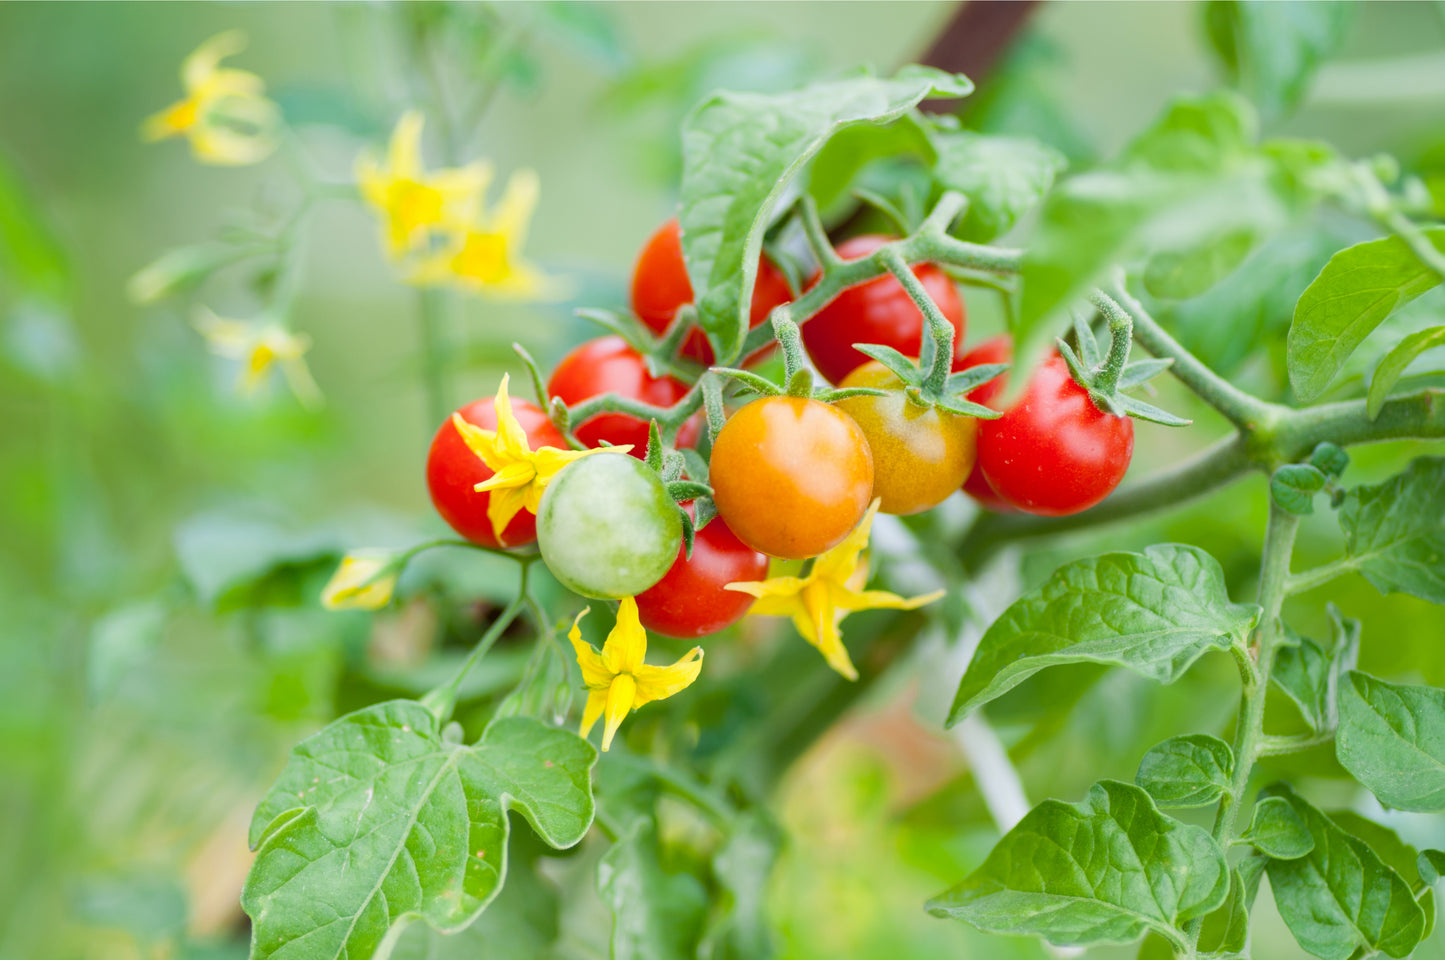 Tomato Plant Mixed Pack - 'Gardener's Delight' and 'Tumbling Tom Red' - 6 x Large Plants in 9cm Pots